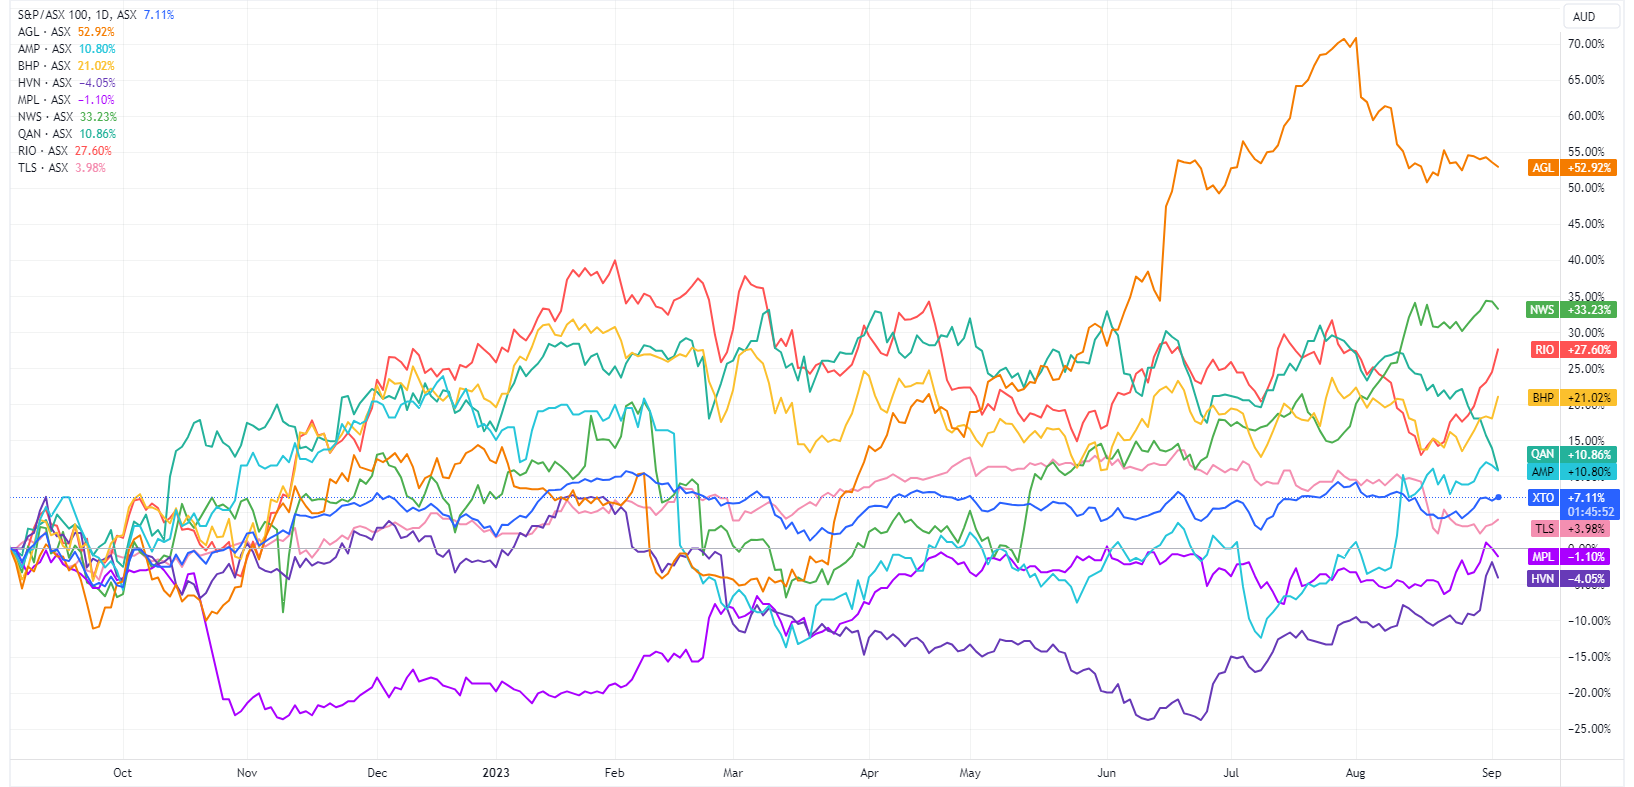 Selection of most distrusted companies, 1-year share price performance. Source: Trading View